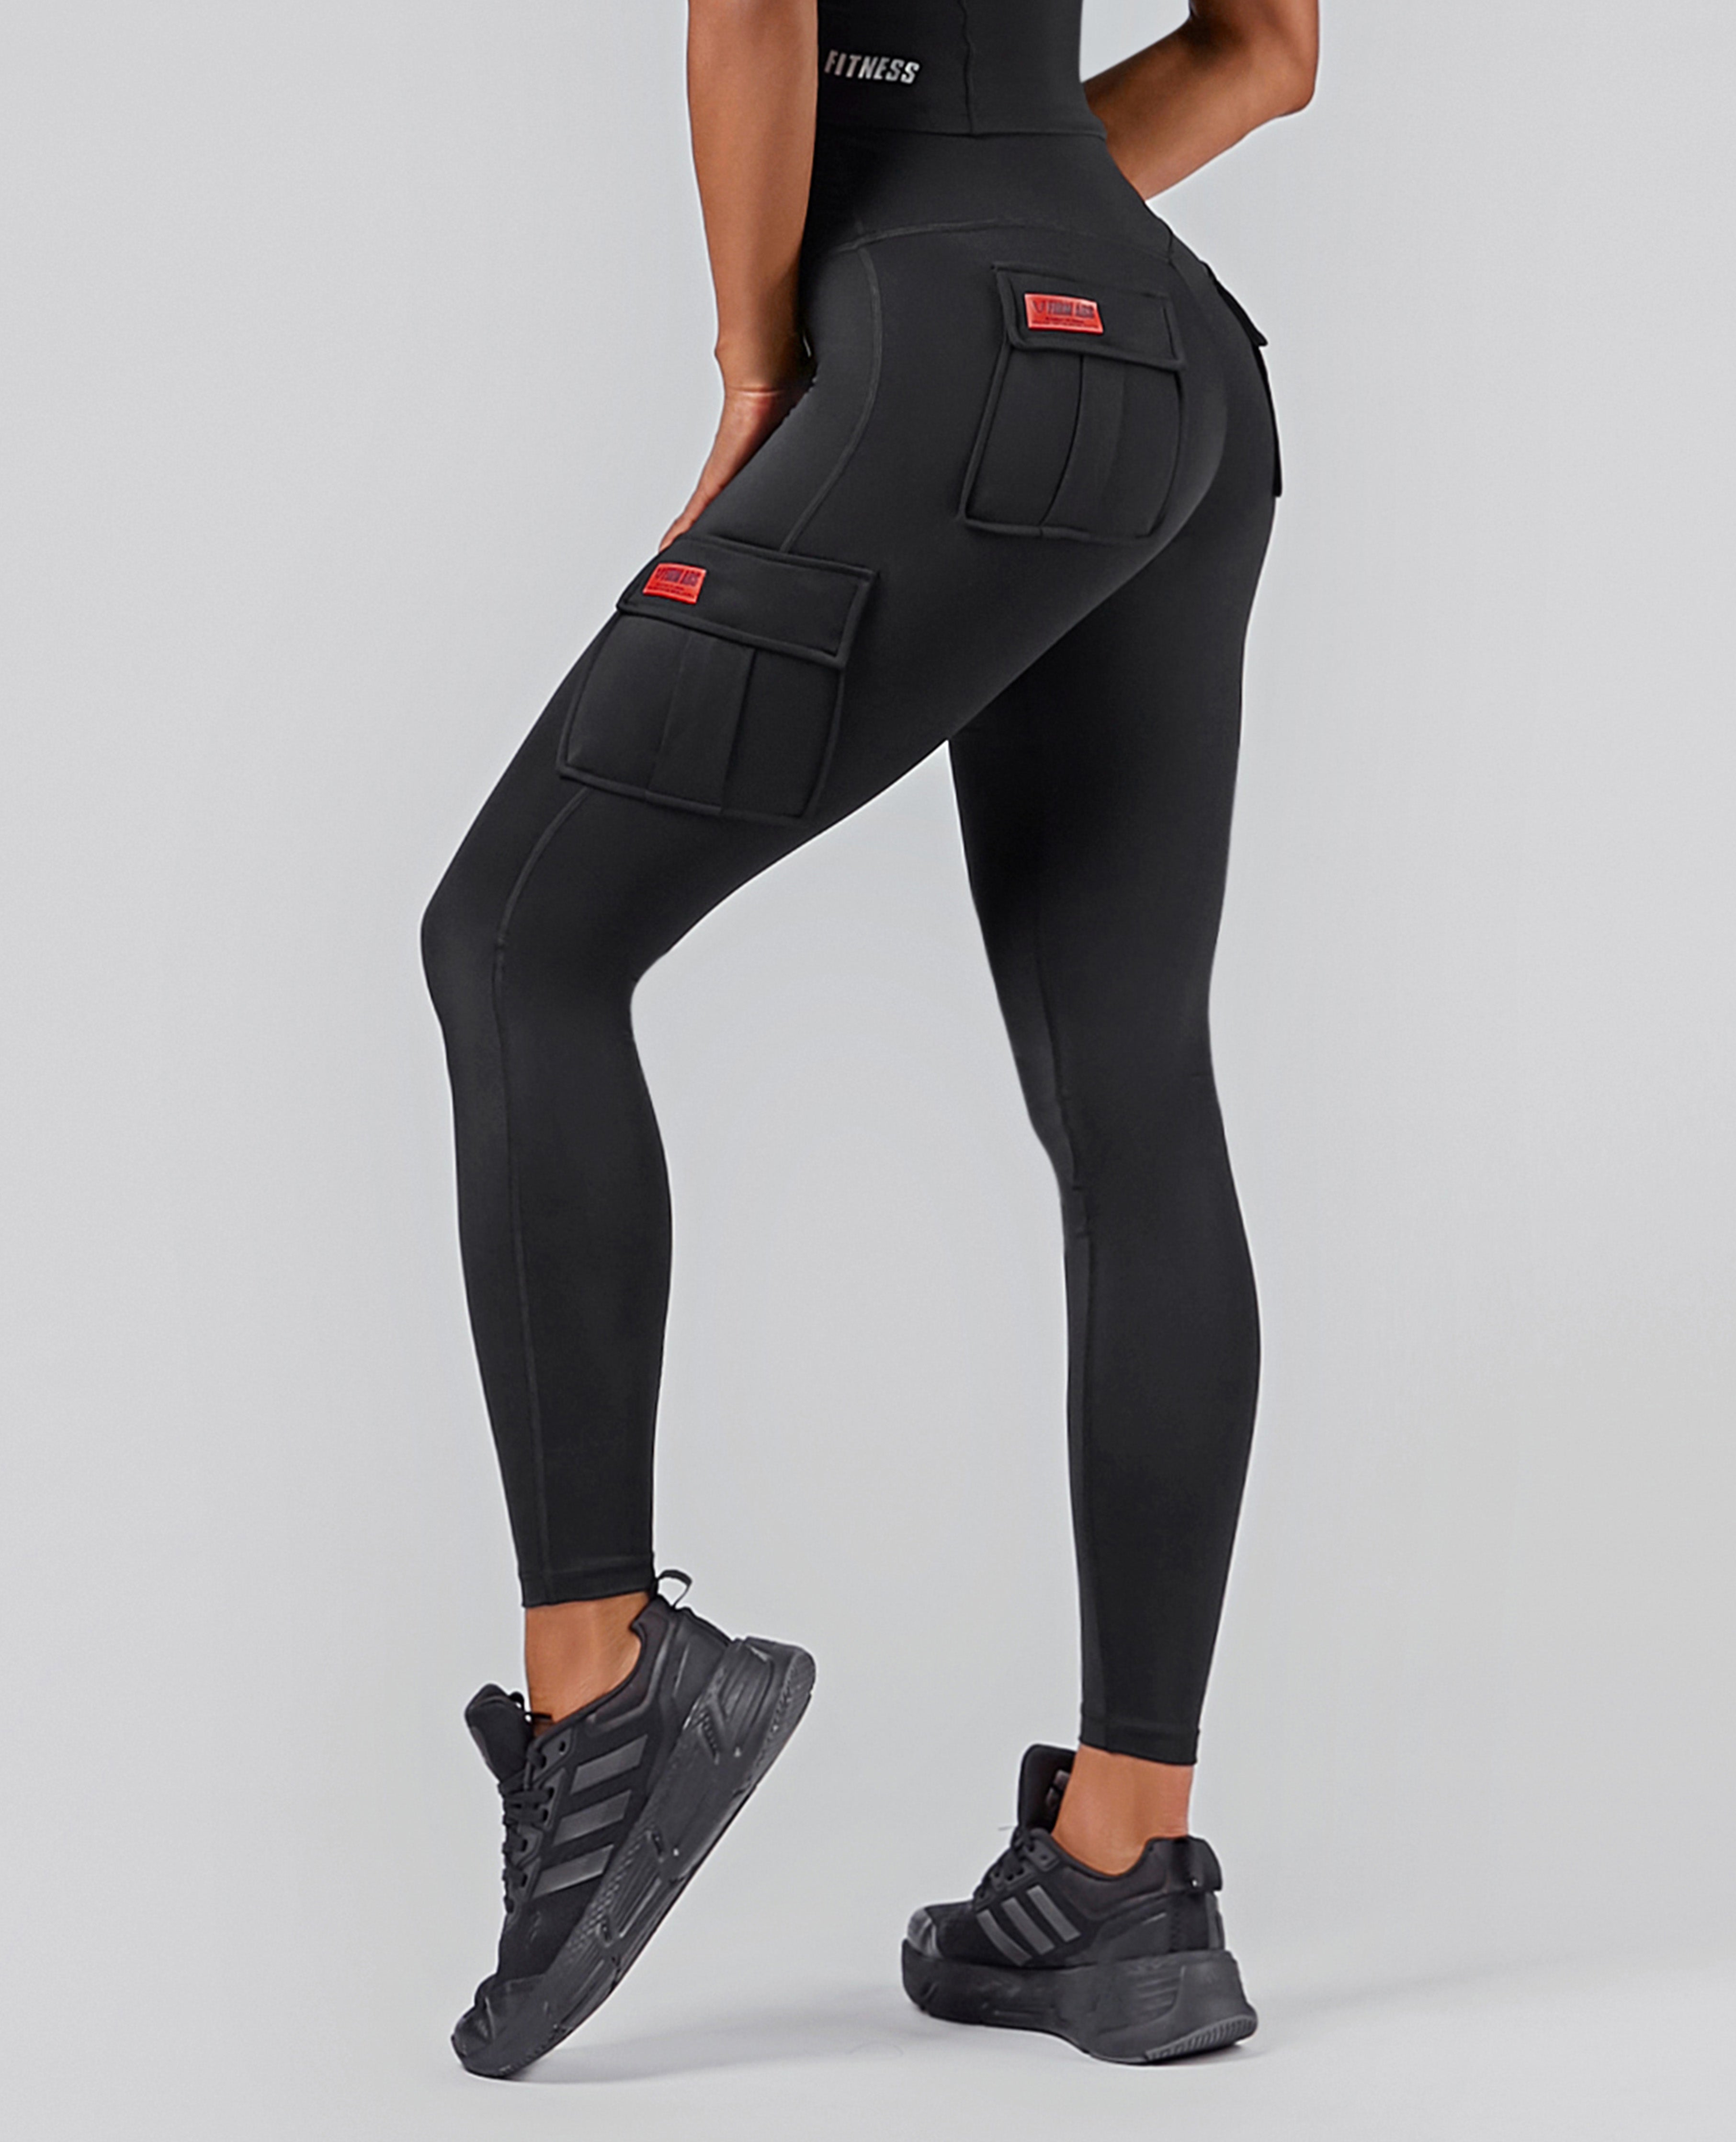 FIRM ABS - CARGO POWER LEGGINGS who is working out today?🥰